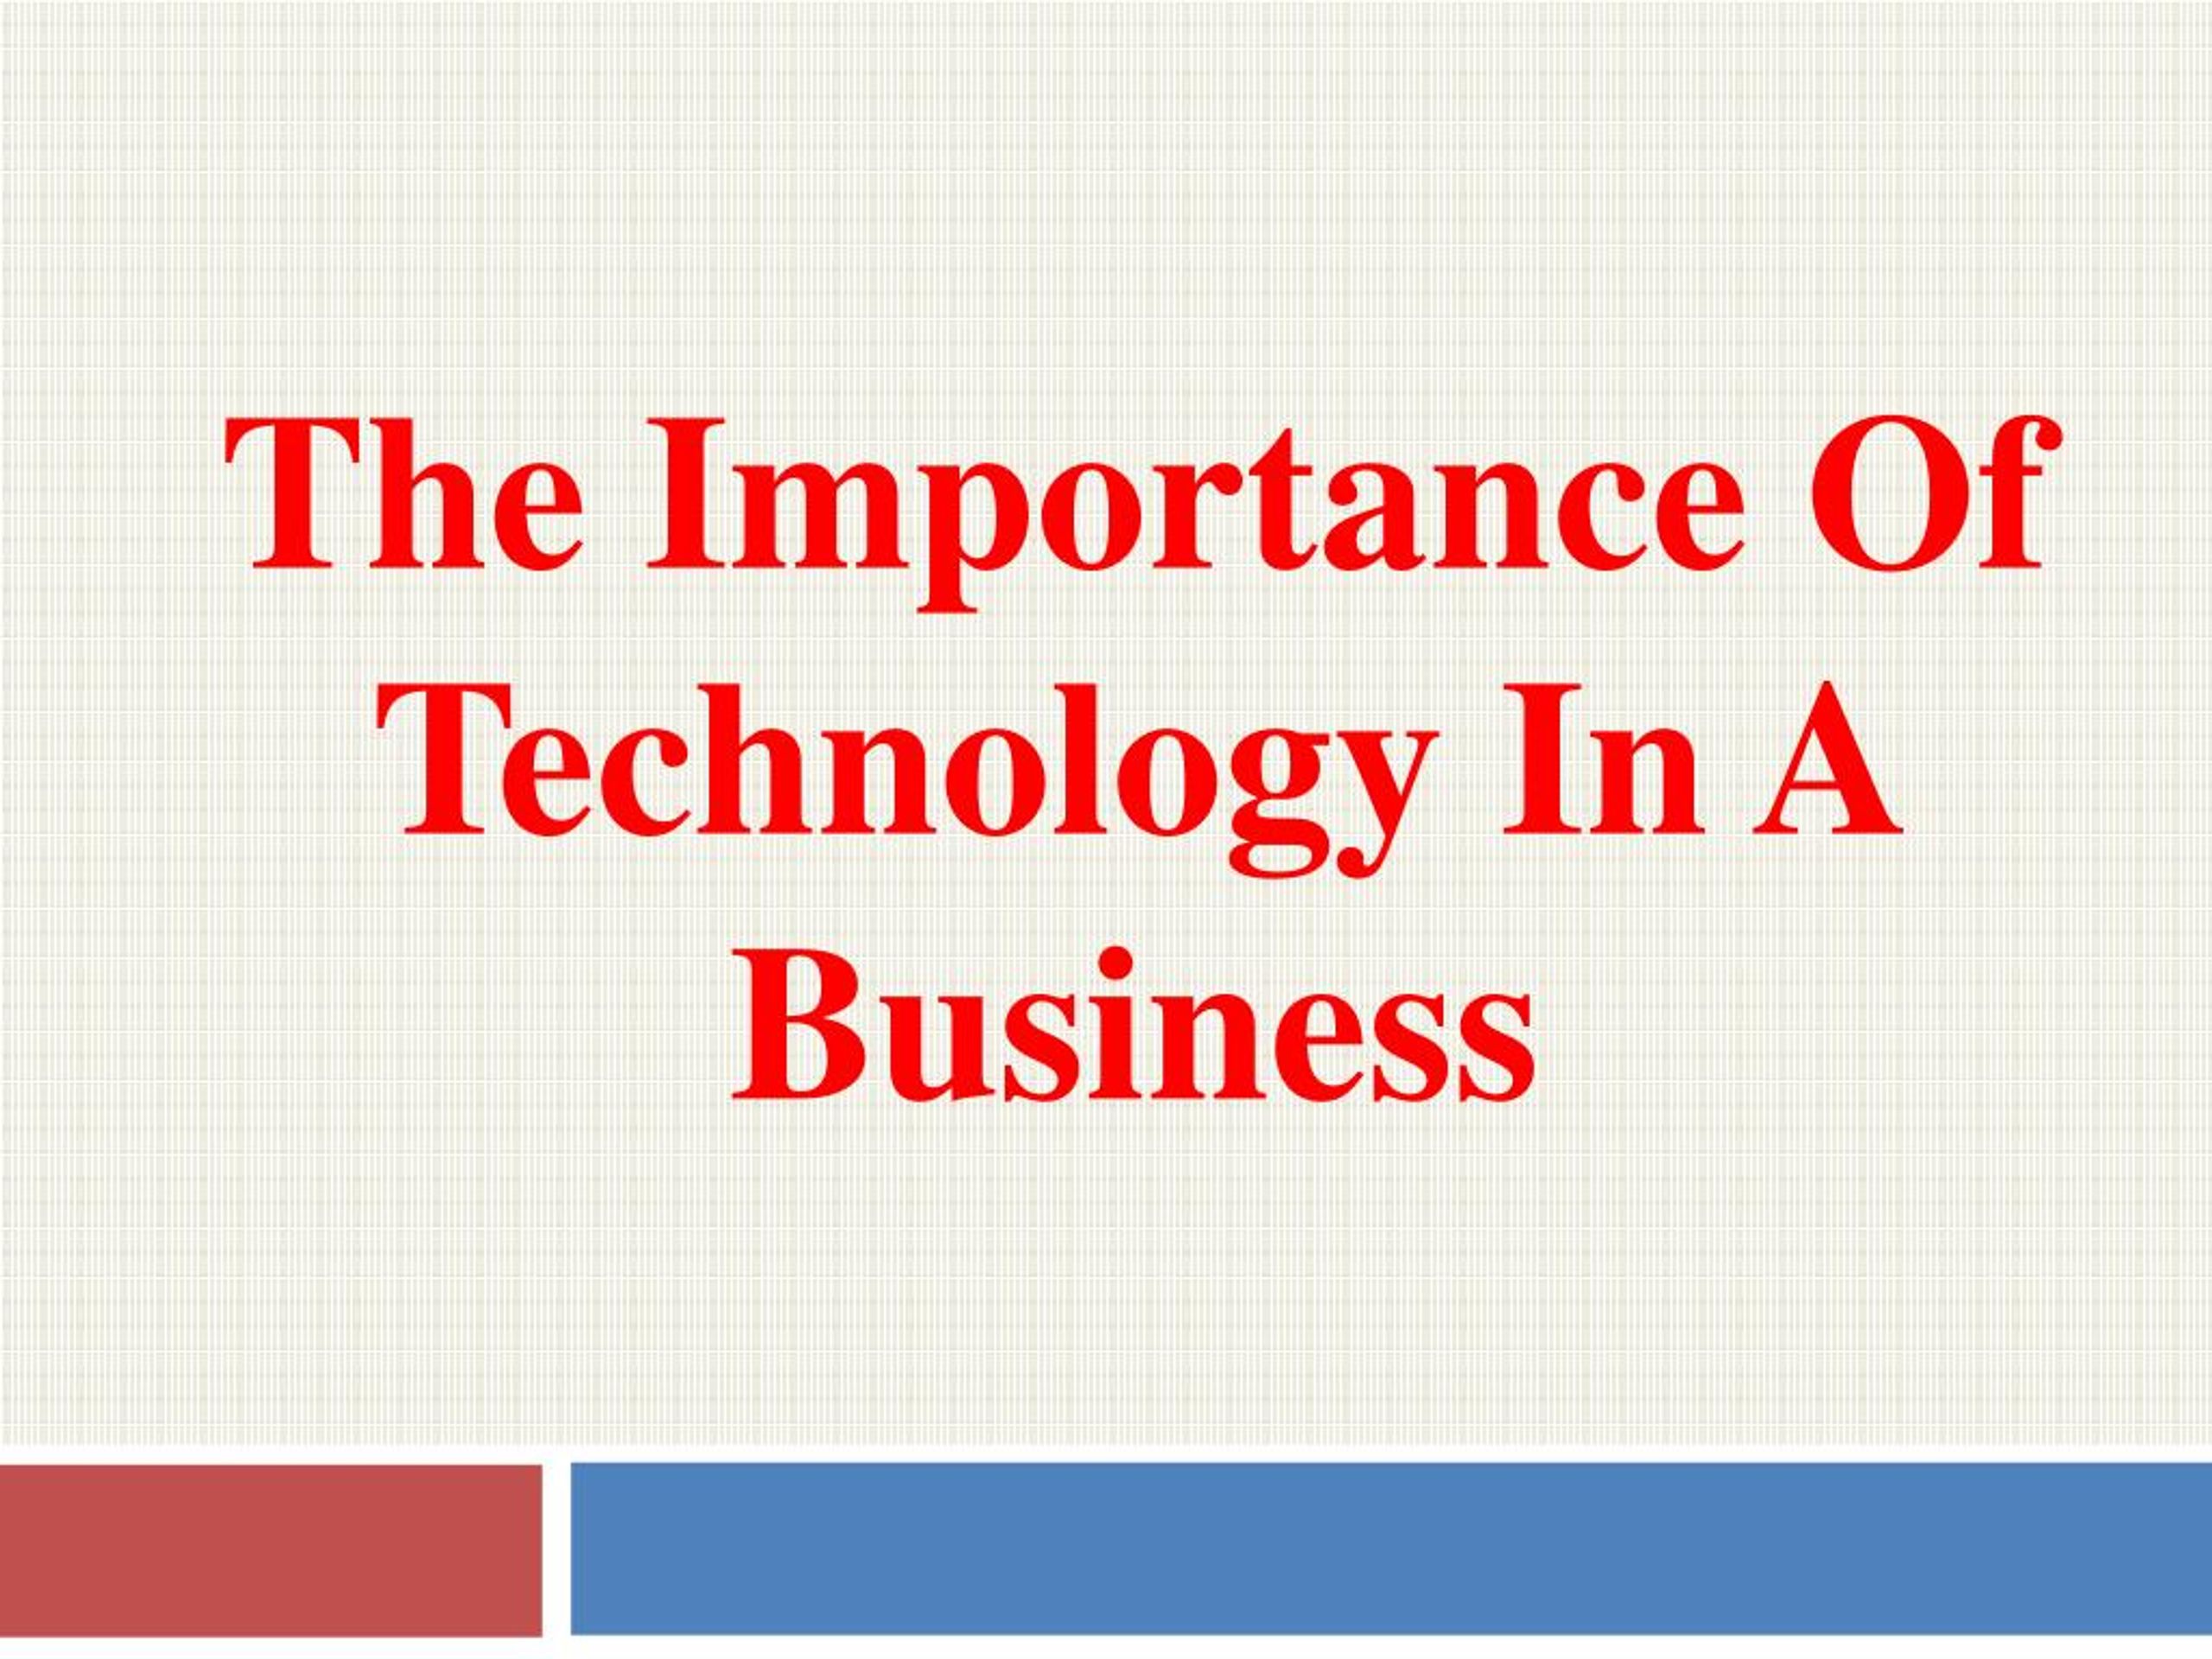 What is Technology Management and Why is it Important in Business PowerPoint Presentations?